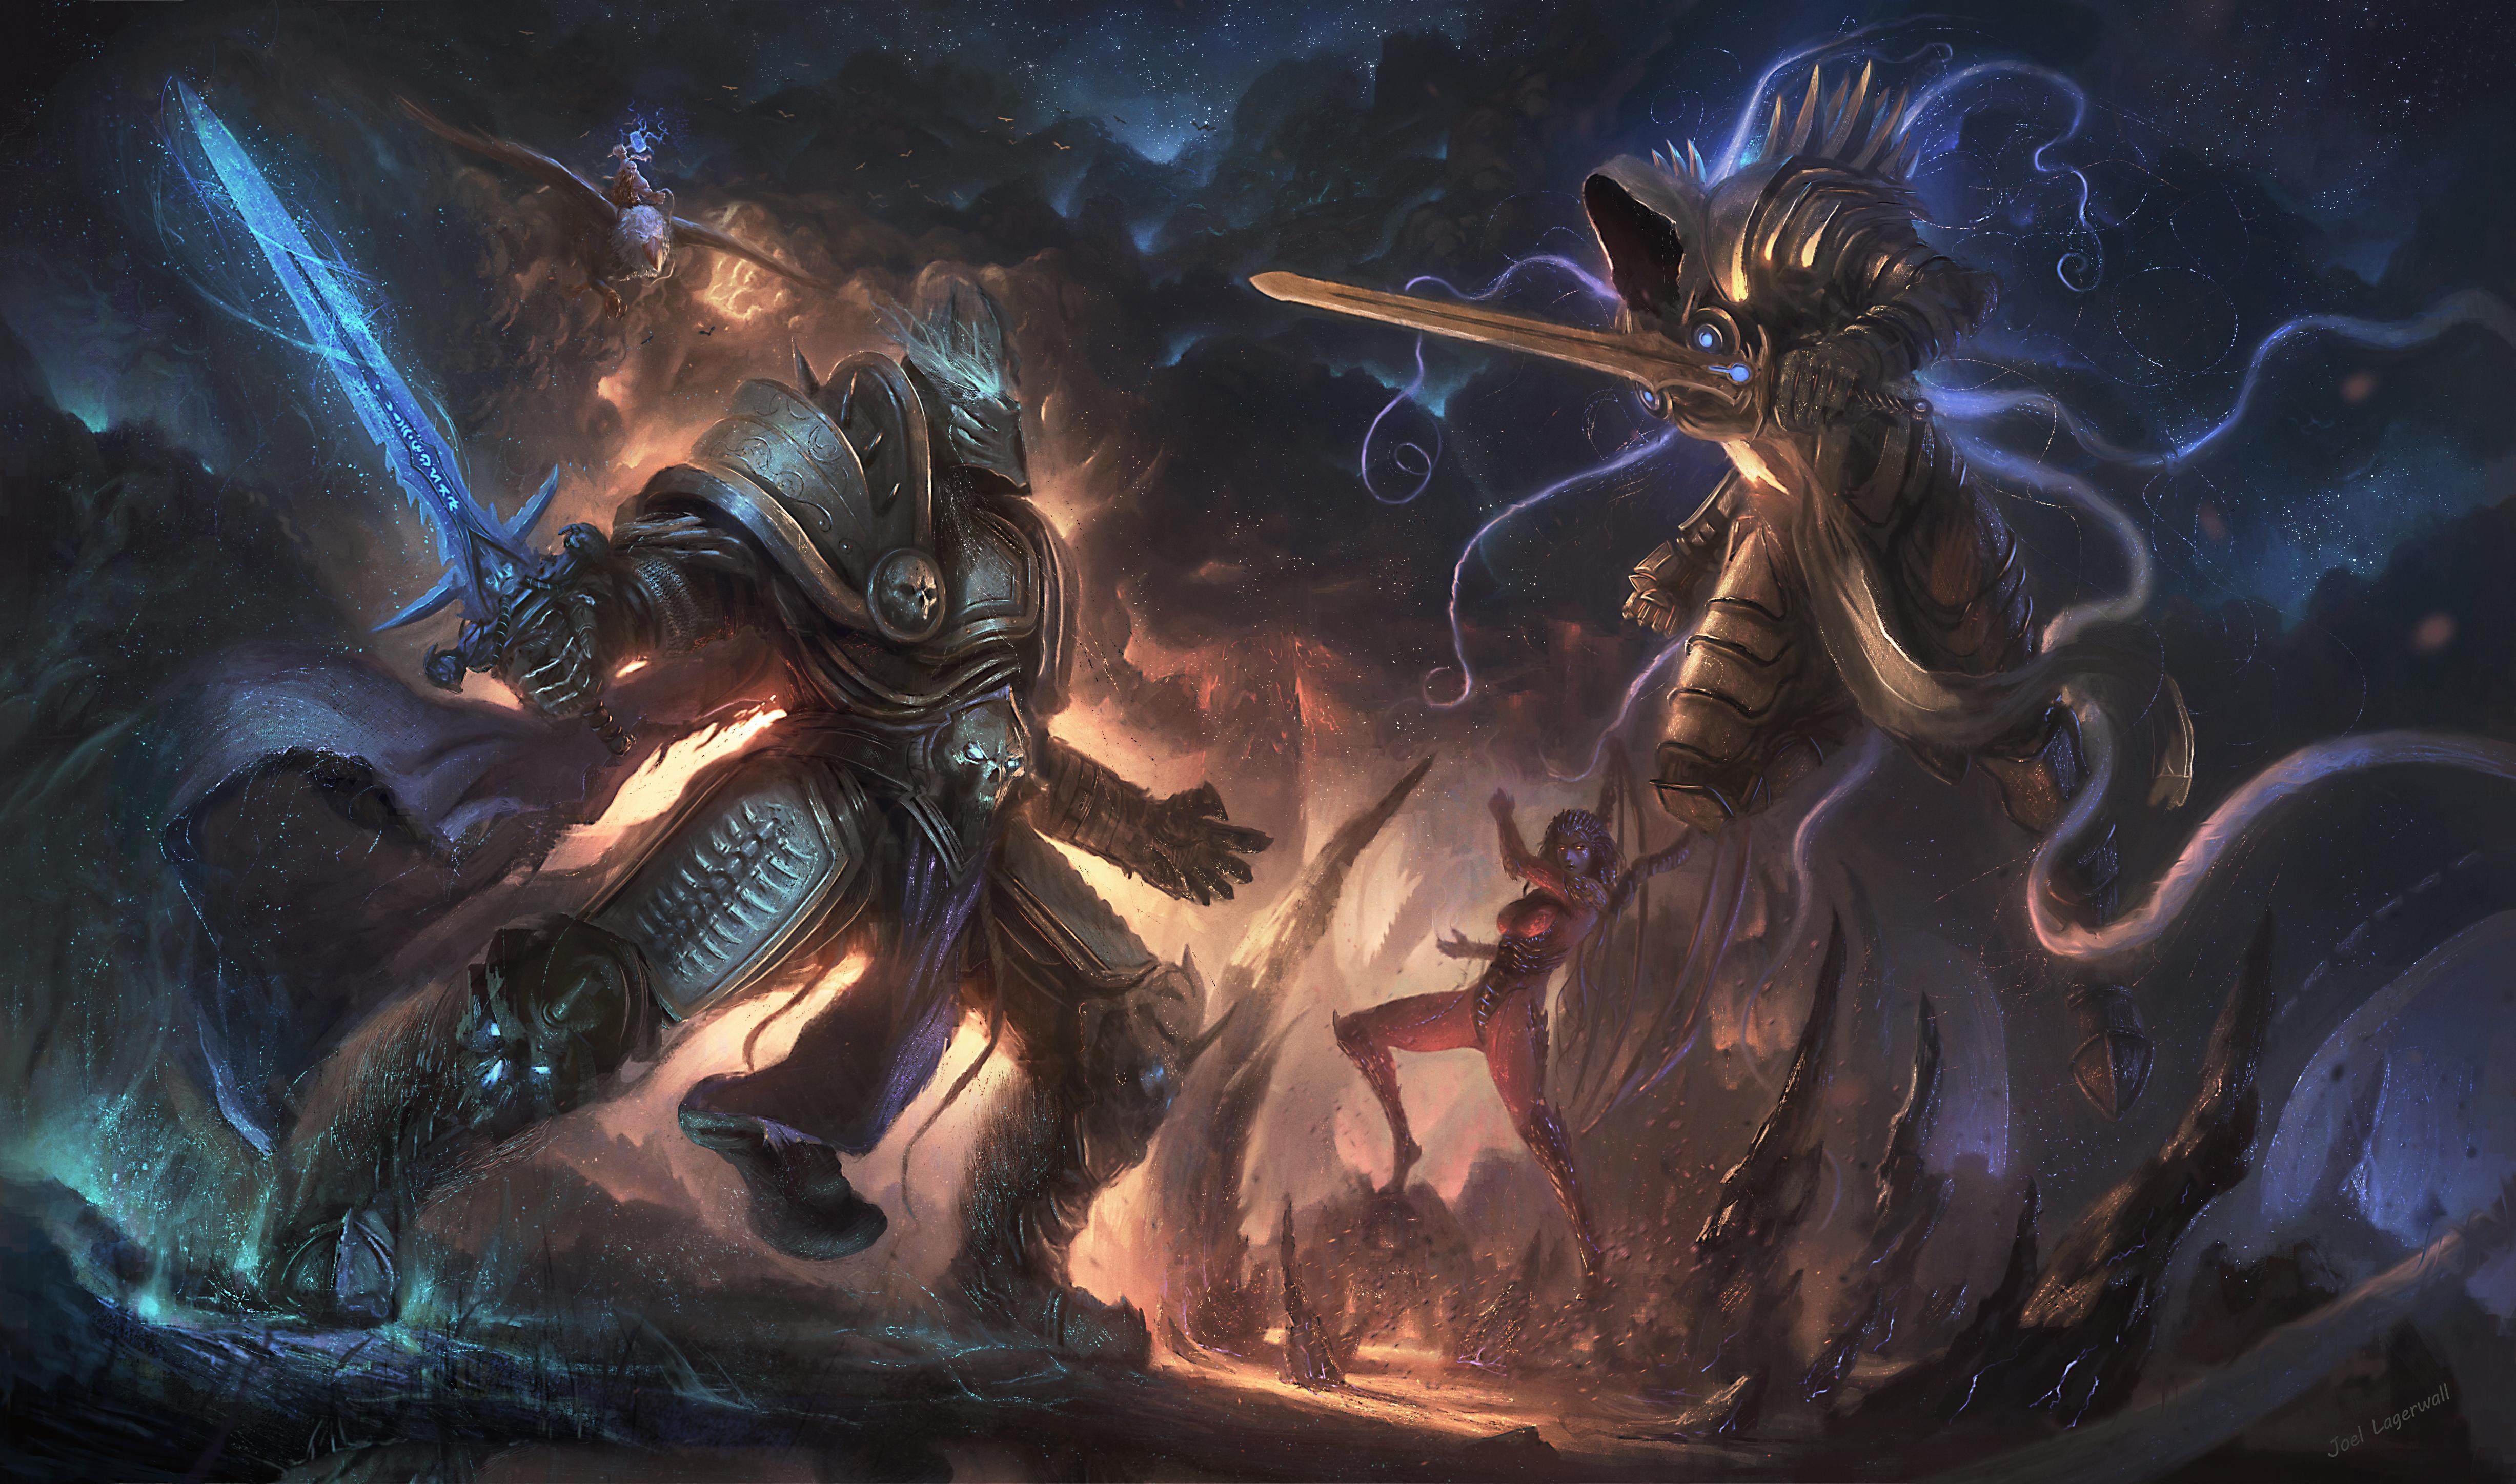 XIH871: Heroes Of The Storm Wallpaper, Heroes Of The Storm Photo